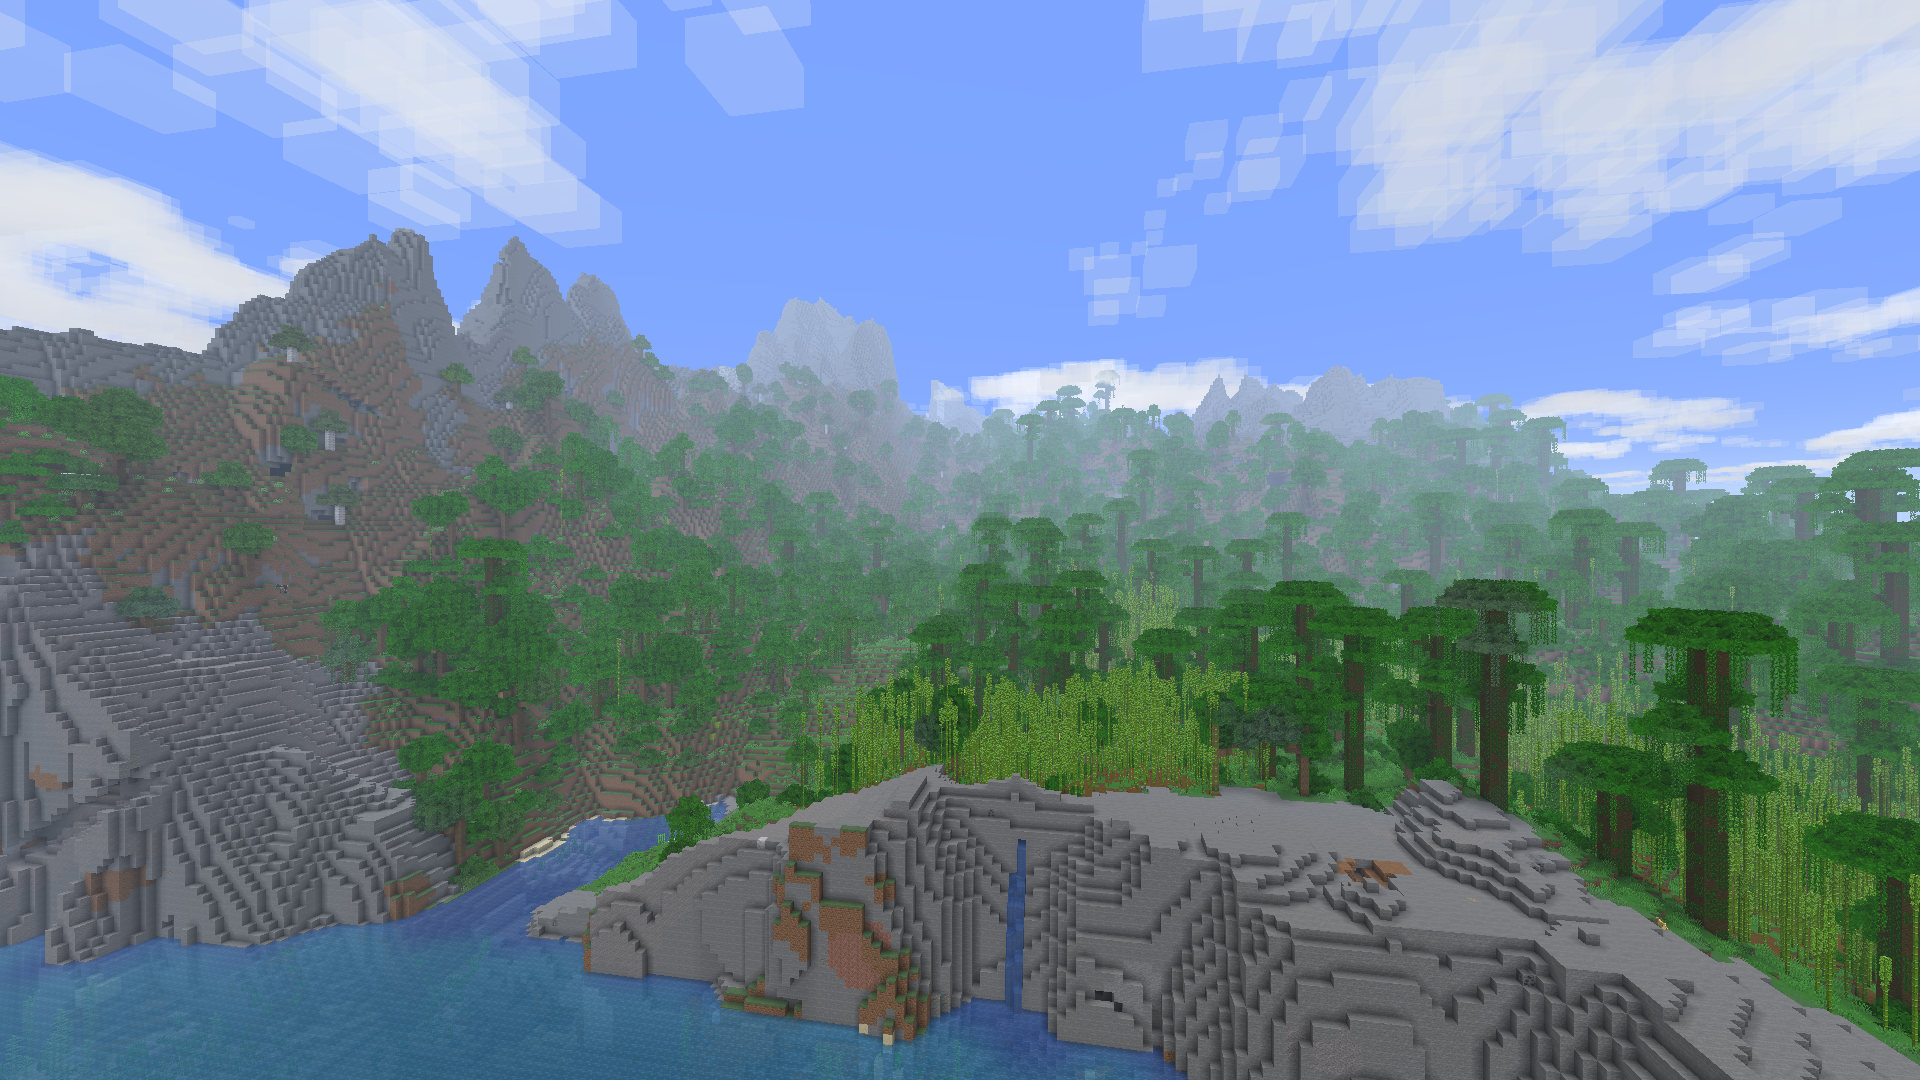 Shows off Simple Fog, Better Clouds, and Bobby at 24-chunks.